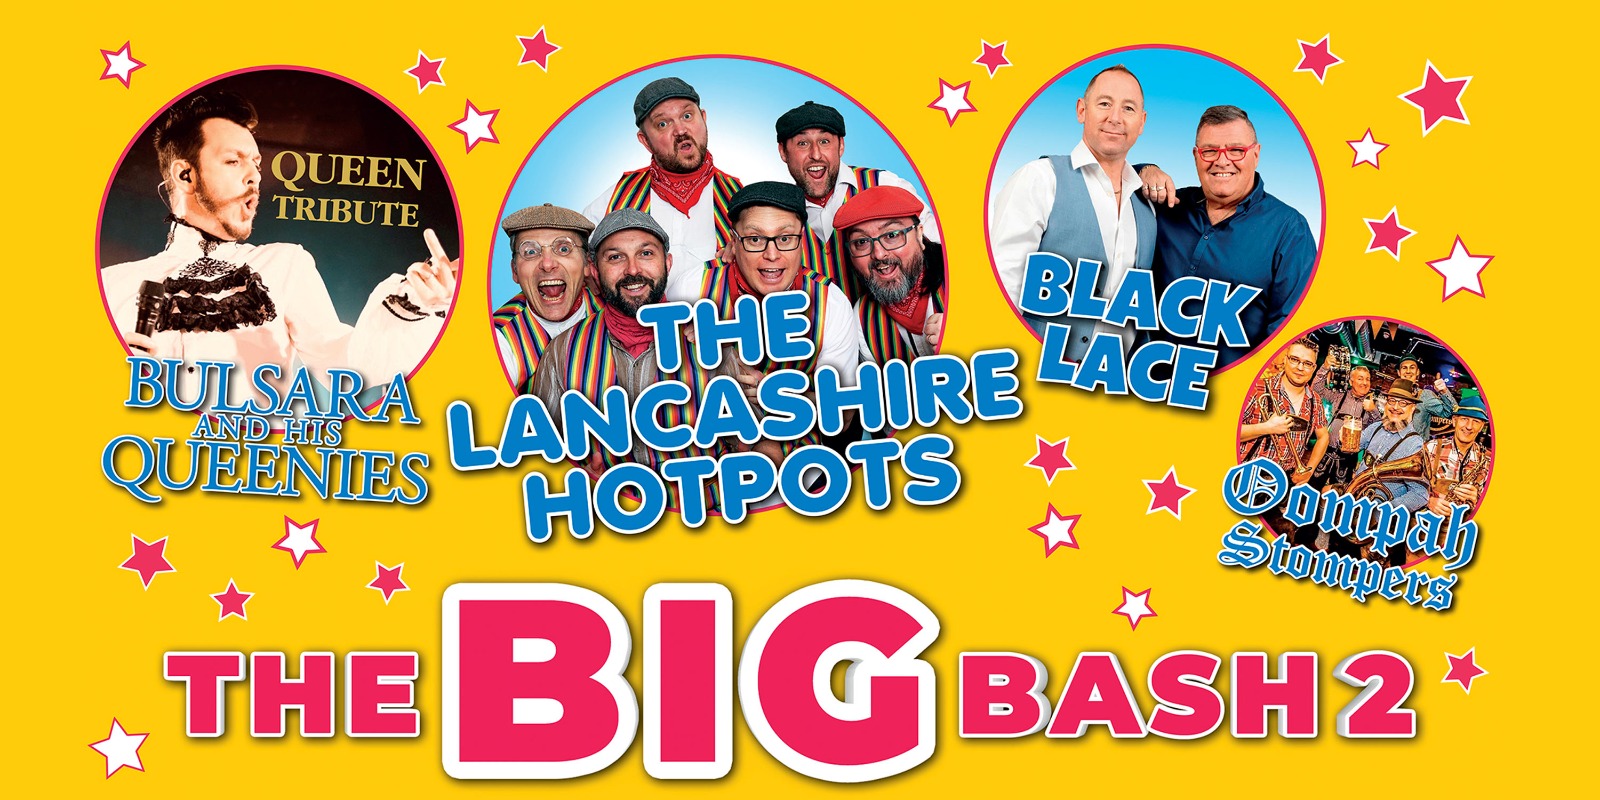 Big Bash 2 promotional image featuring The Lancashire Hotpots, Bulsara & His Queenies, Black Lace and the Oompah Stompers